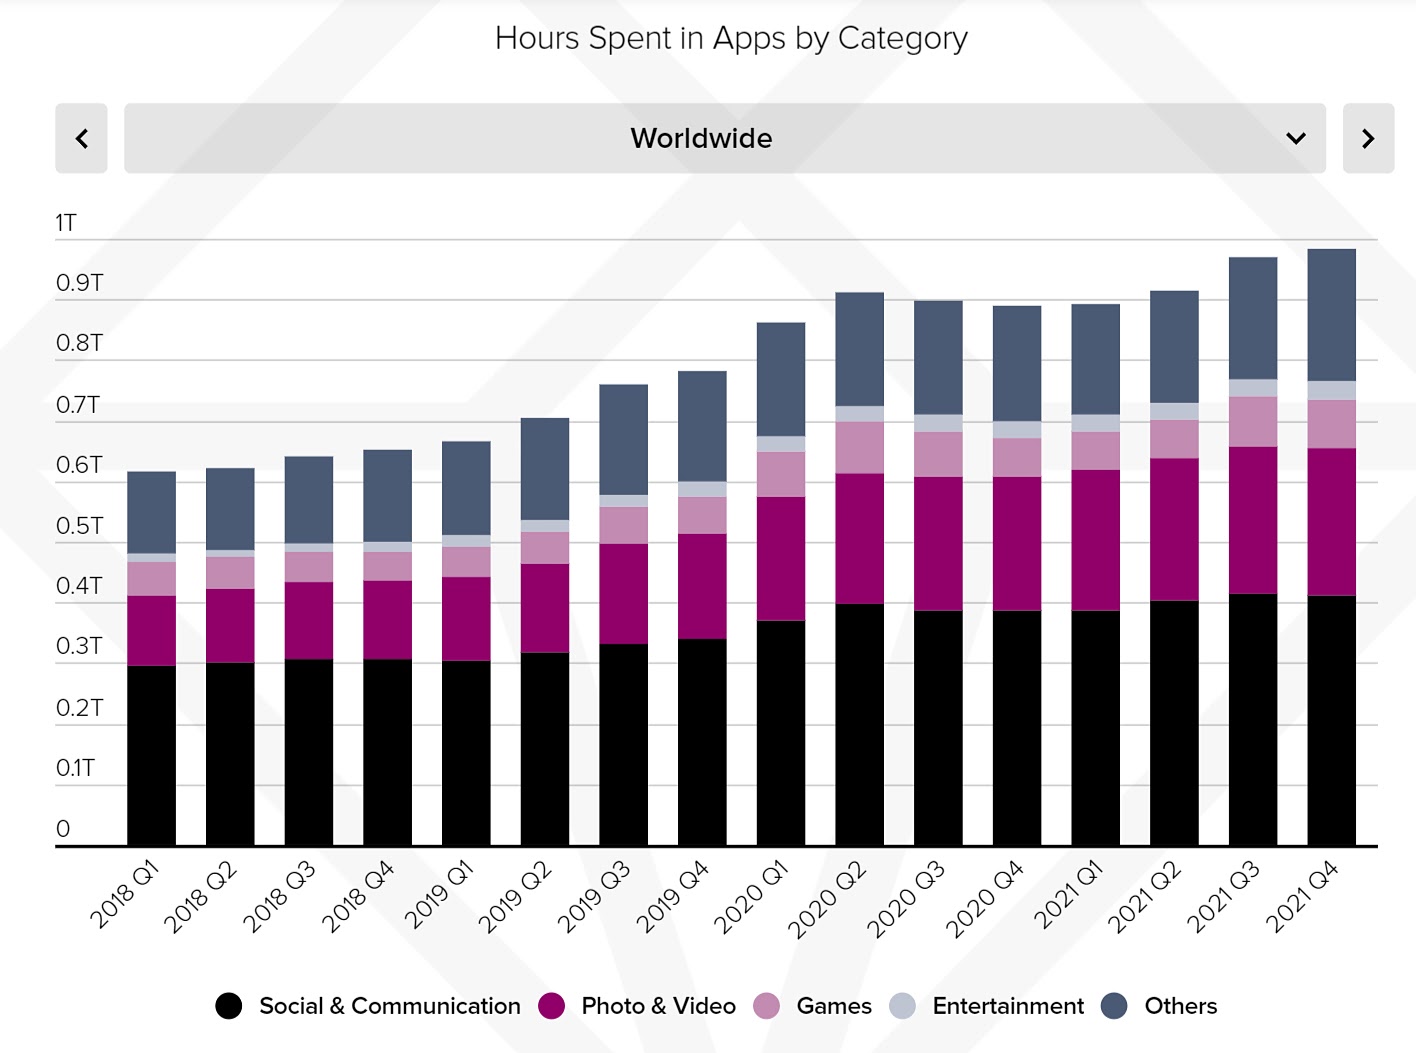 Data from State of Mobile 2022 report, showing hours spent in apps by category